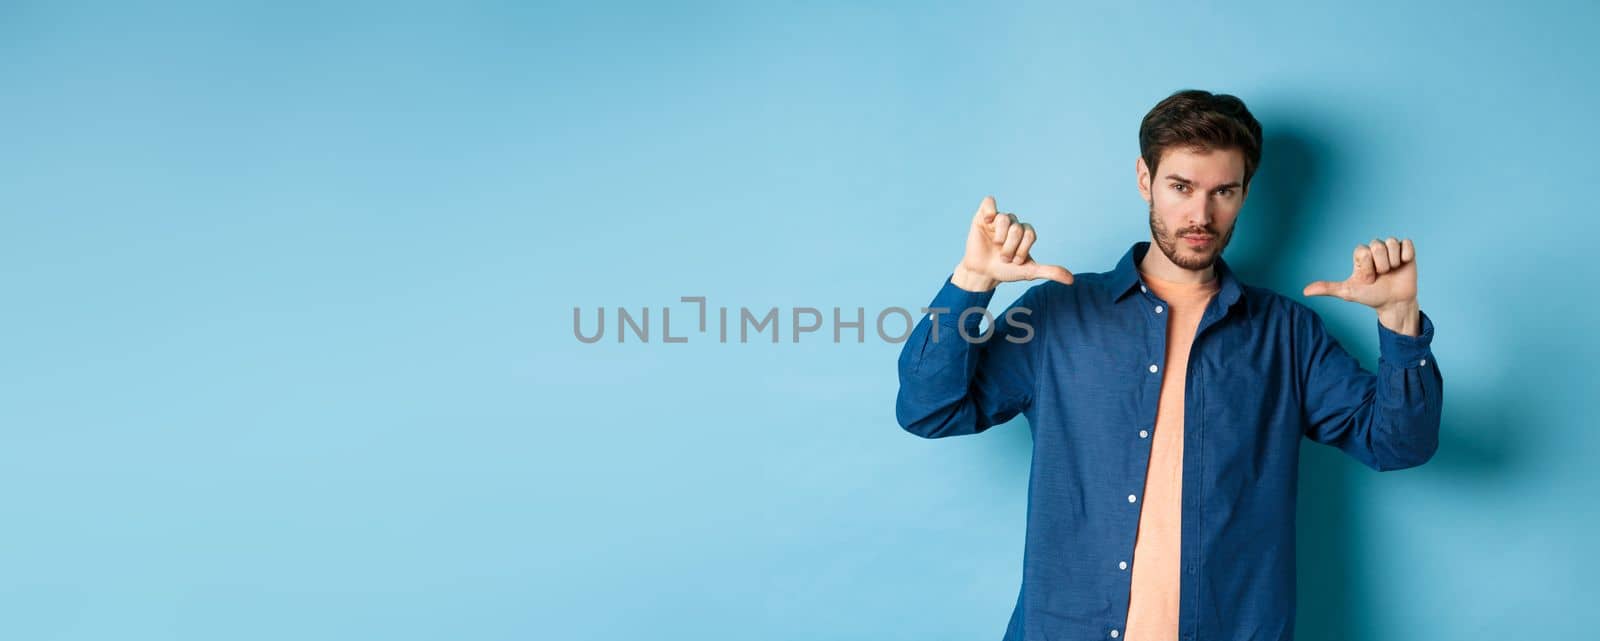 Handsome and confident man with beard, looking at camera and pointing at himself, self-promoting, standing on blue background.